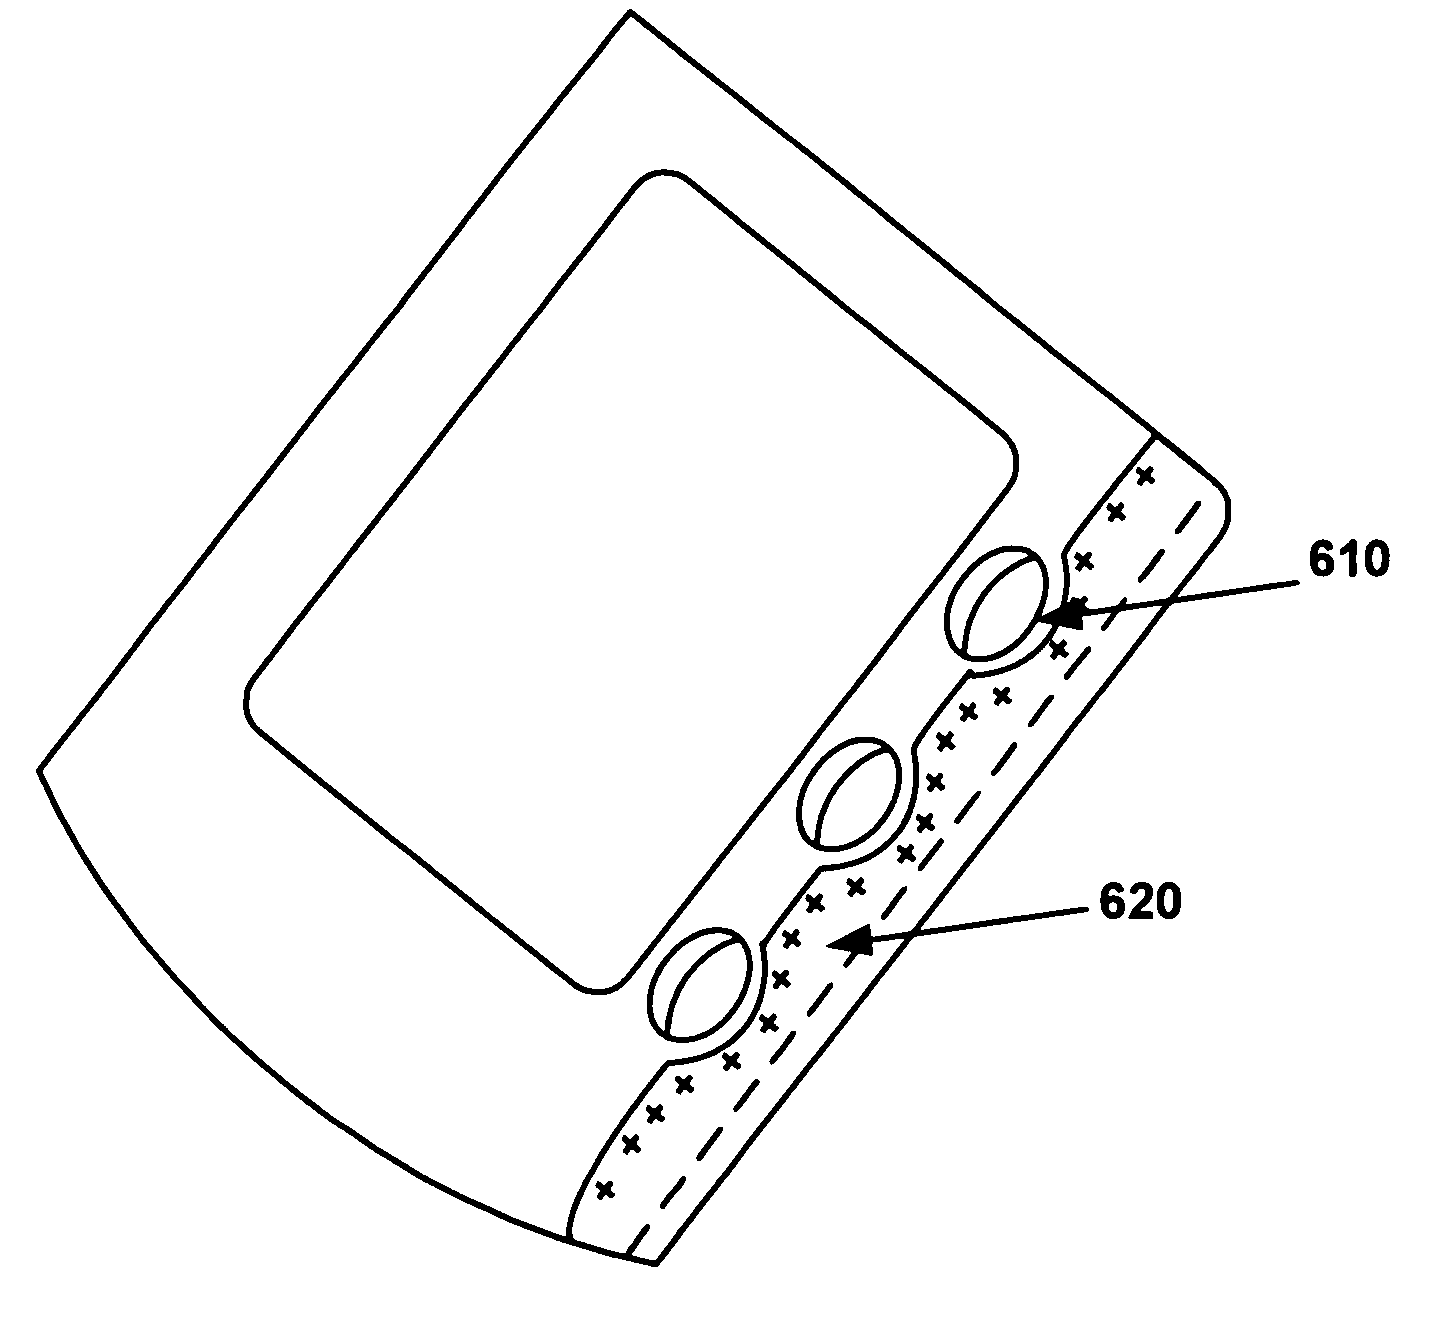 Implementation of electronic muscles in a portable computer as user input/output devices